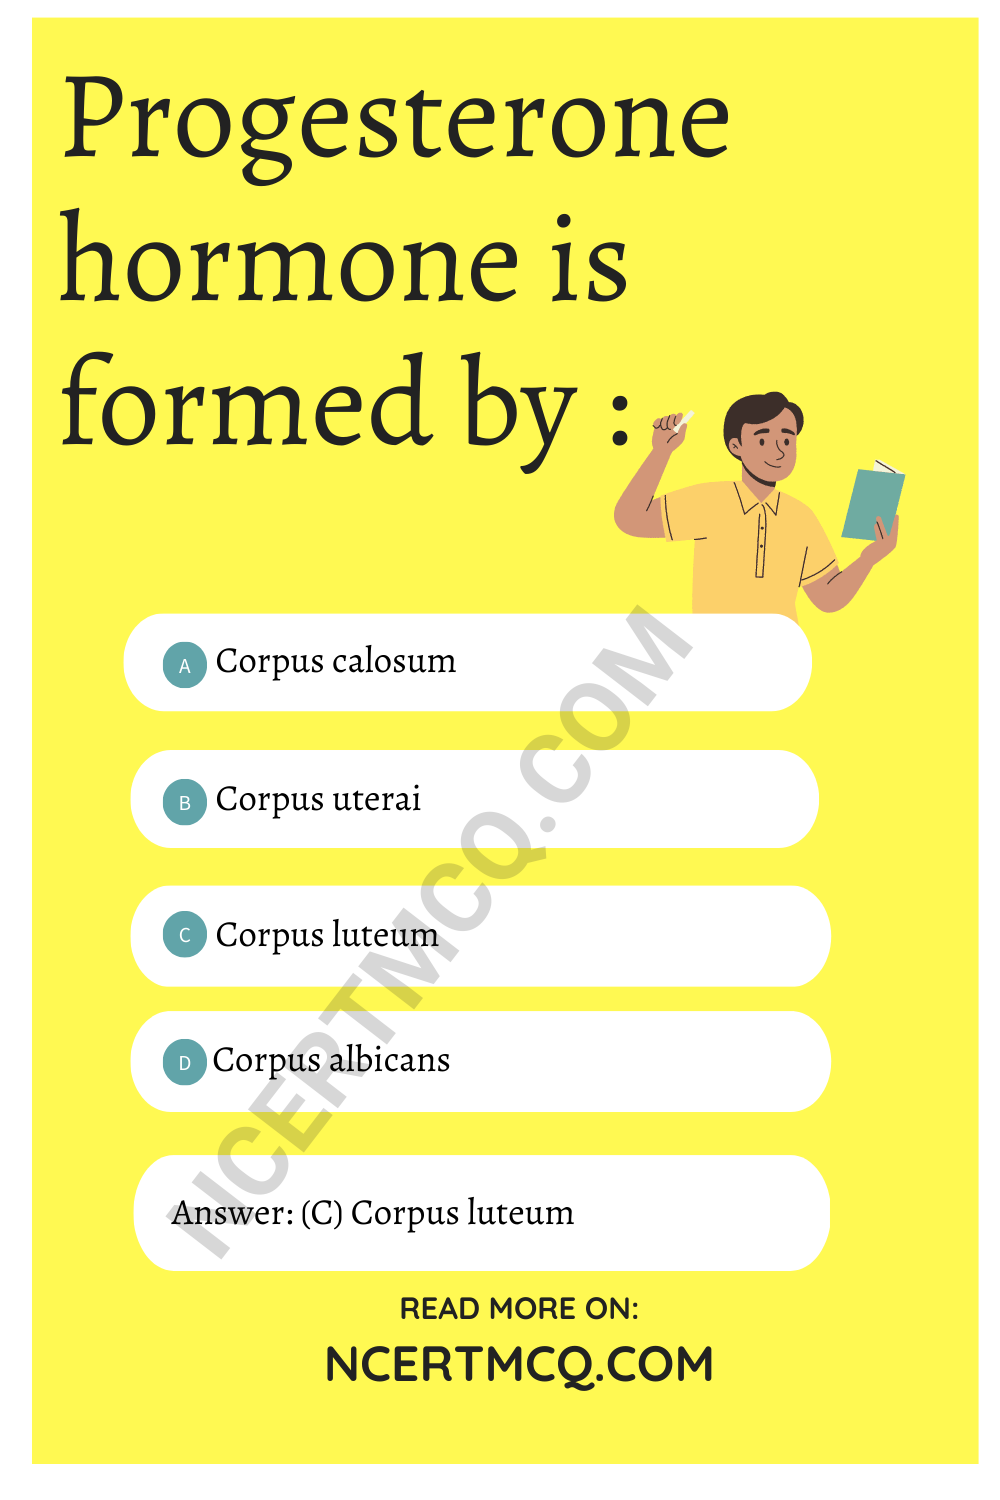 Progesterone hormone is formed by :